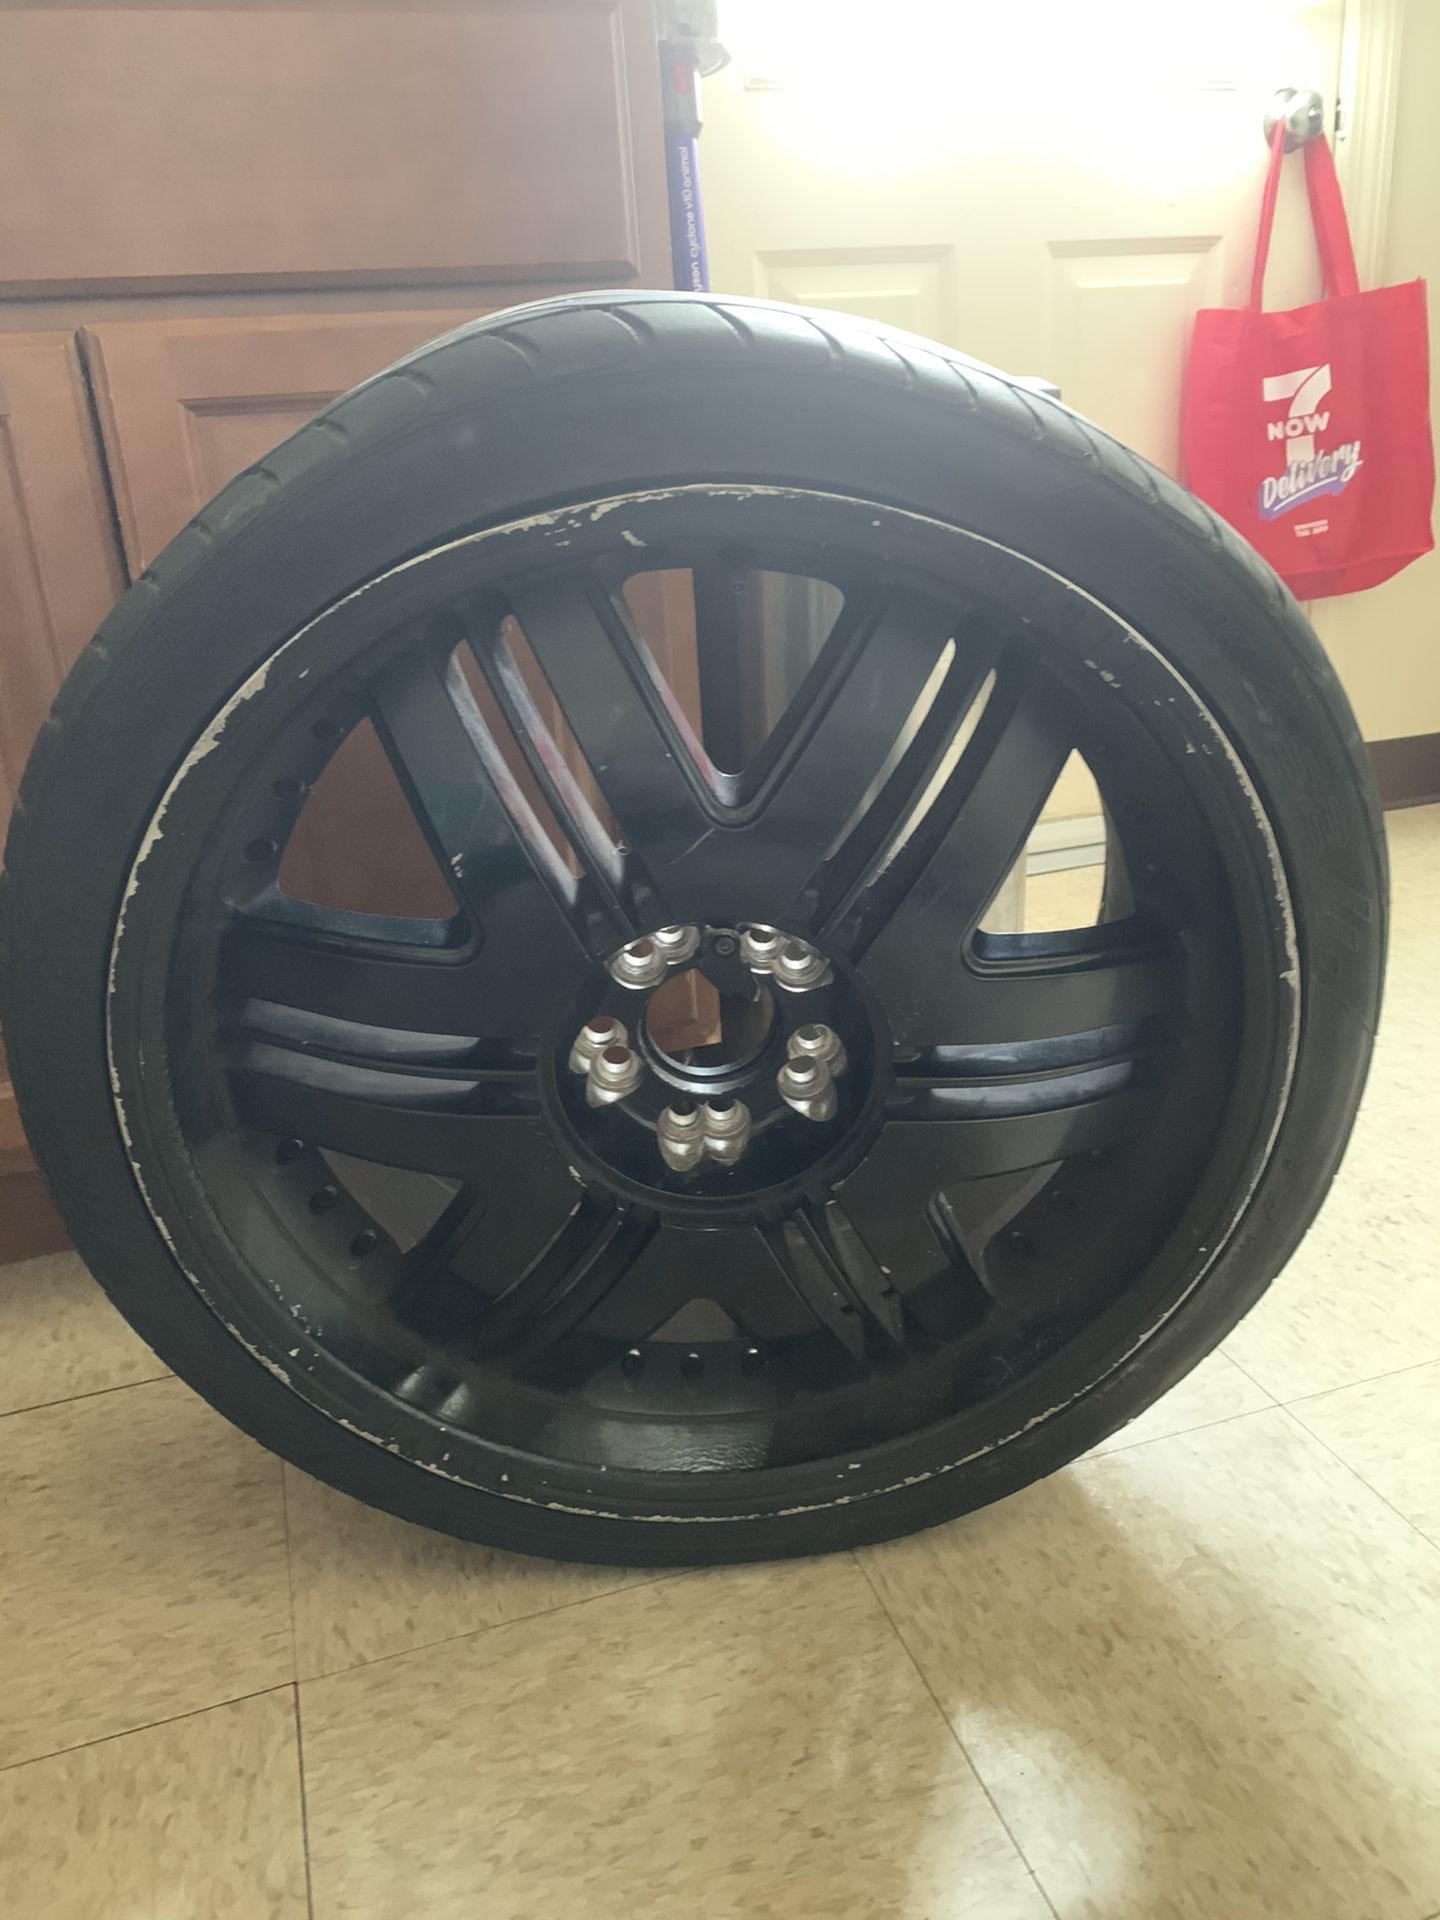 20 inch Rims, chrome part painted black but you can sand it away. Last pic is how it originally looks